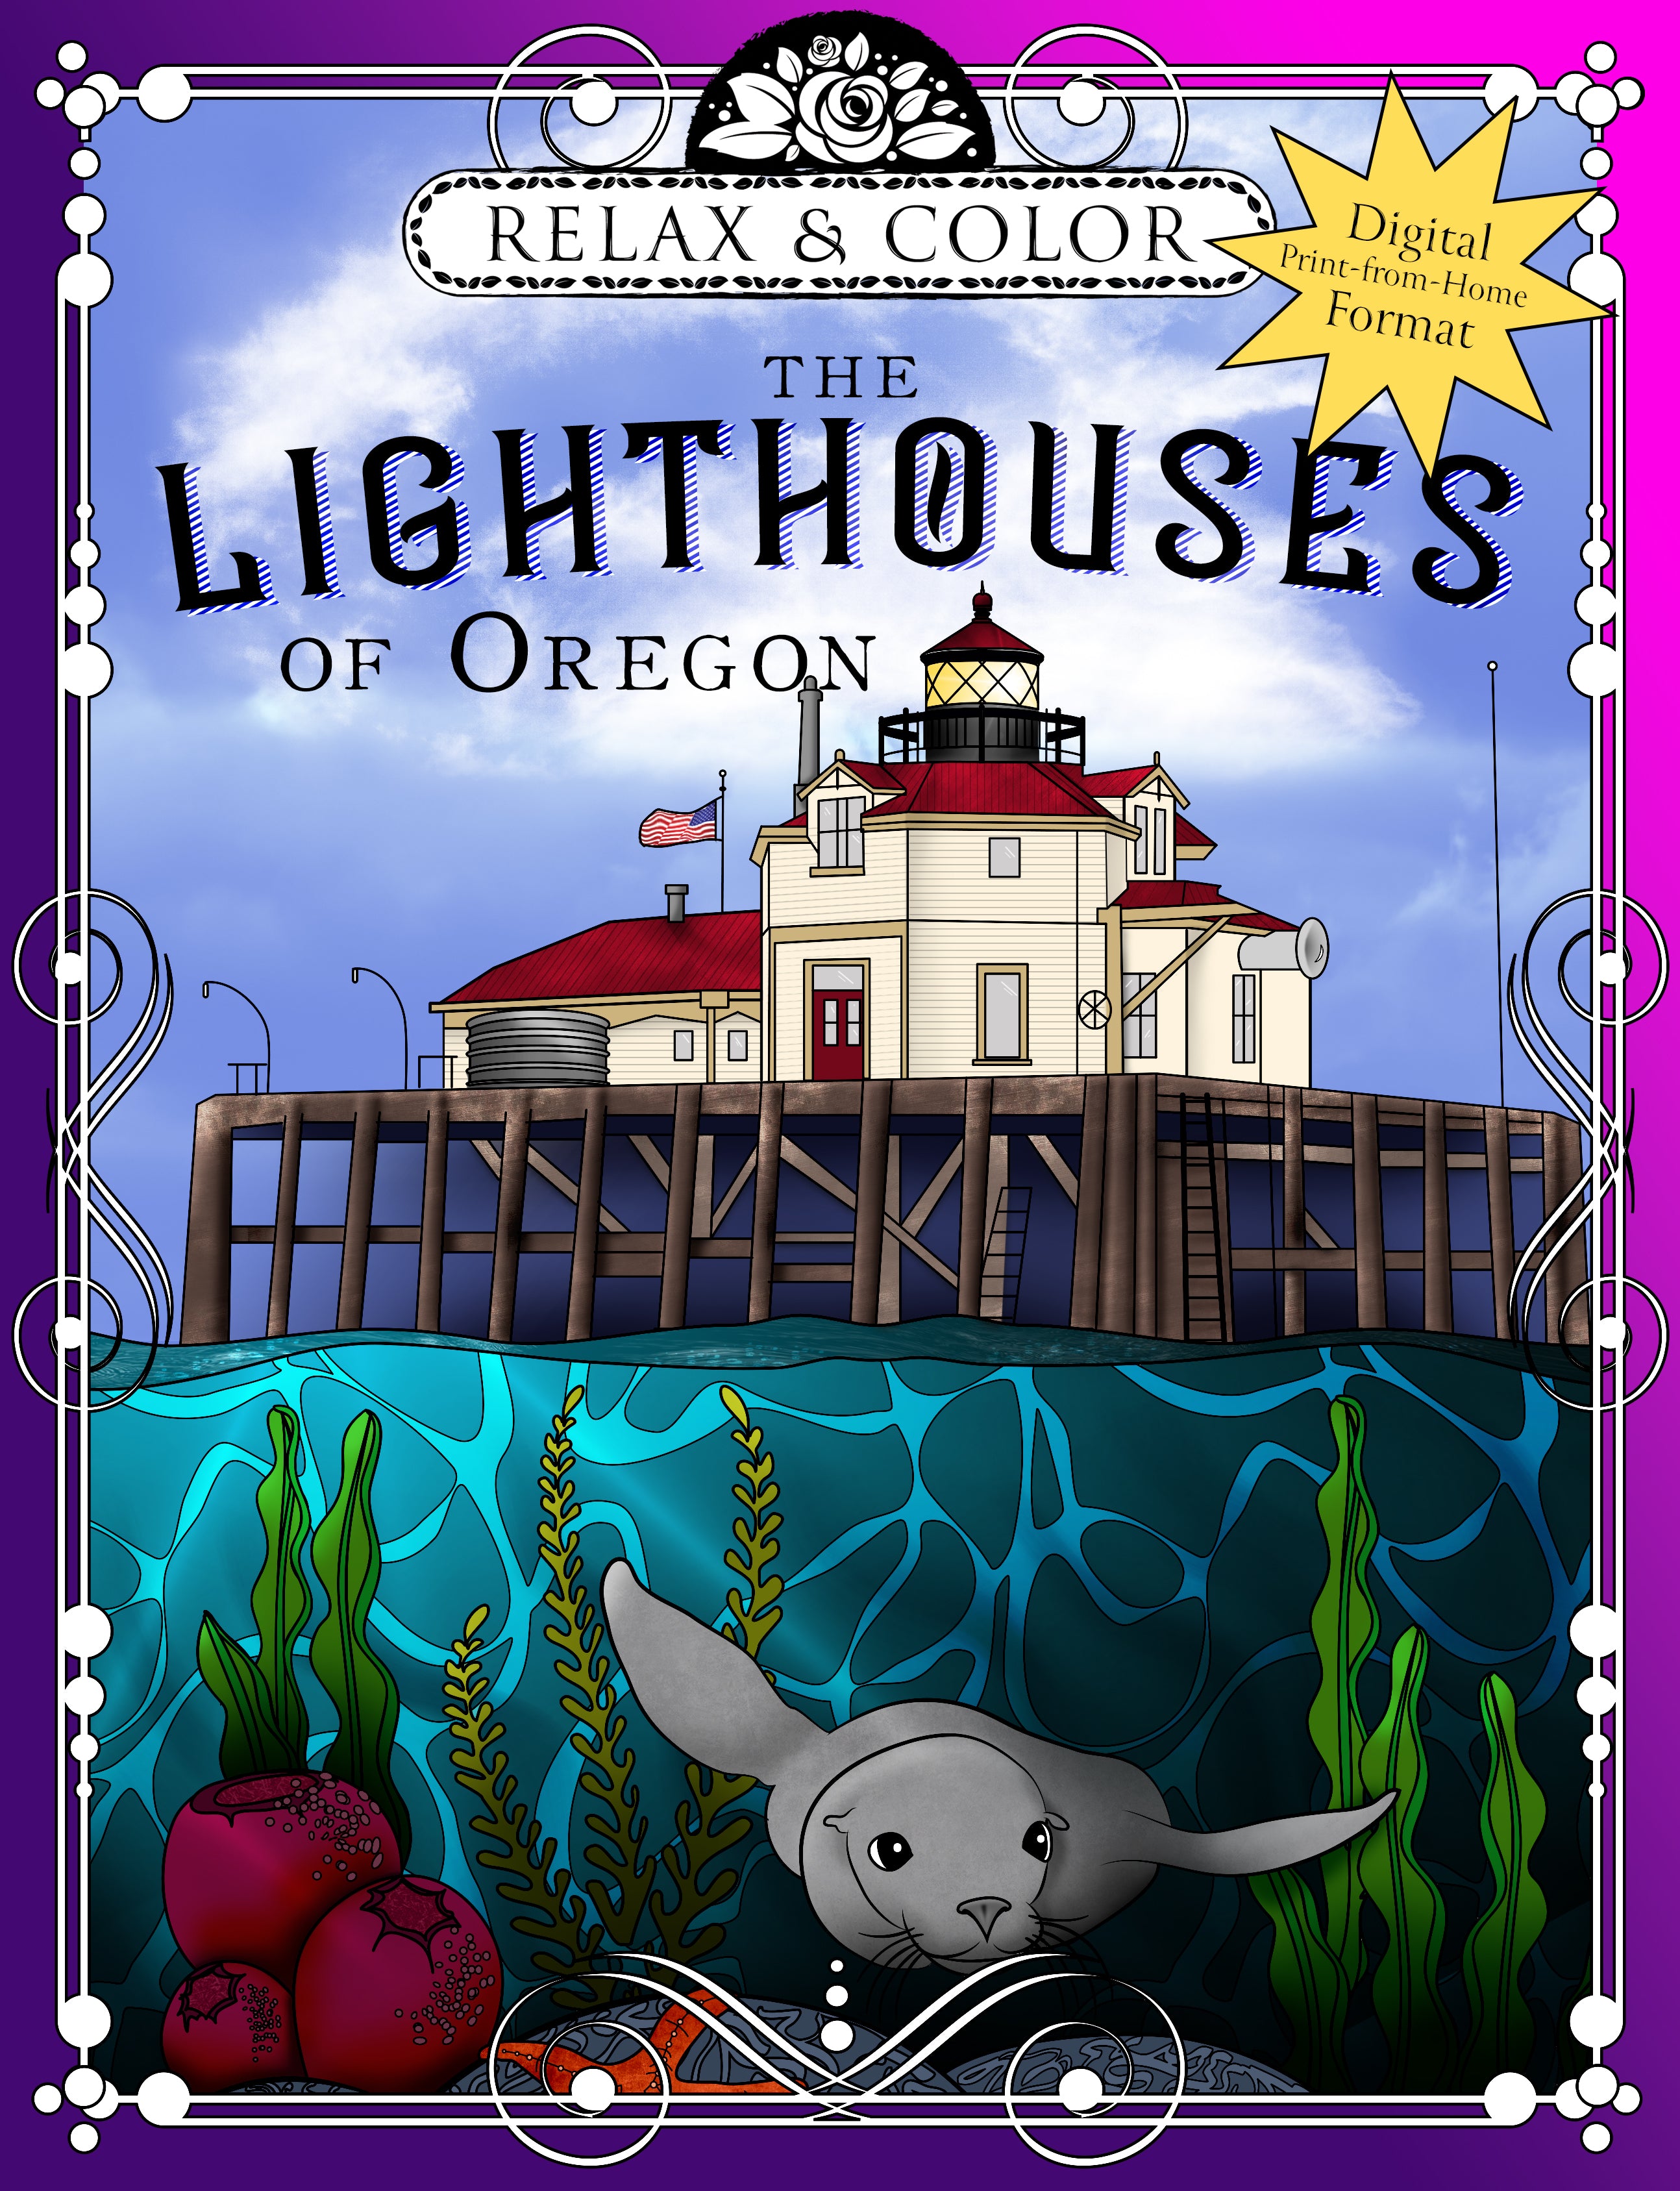 Relax and Color The Lighthouses of Oregon (Digital Print-from-Home Format)